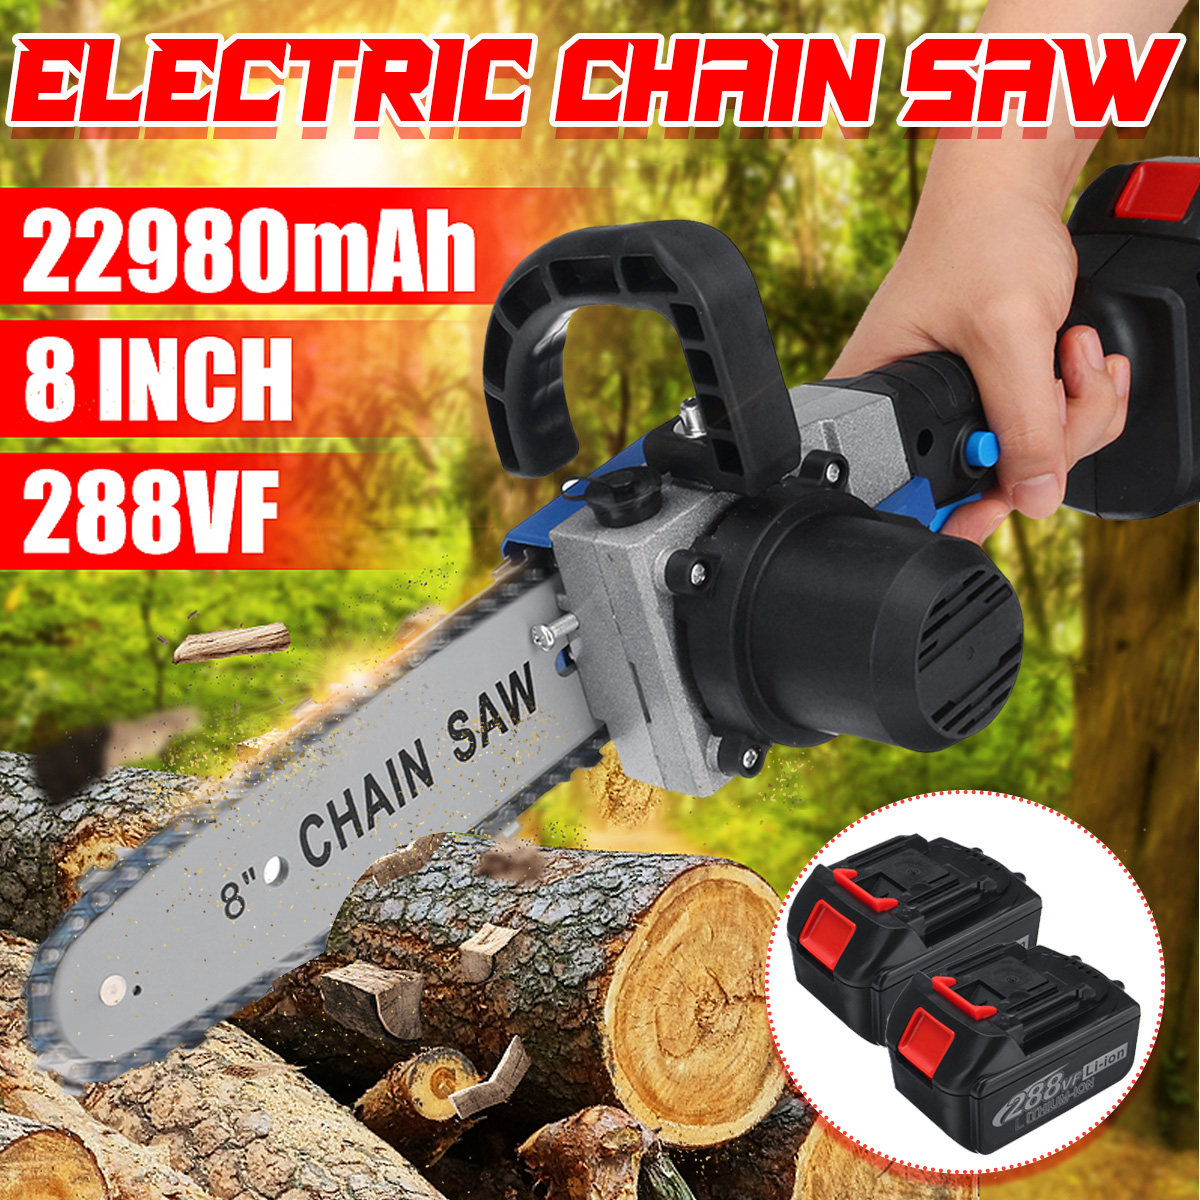 VIOLEWORKS-288VF-8Inch-Electric-Cordless-One-Hand-Saw-Chain-Saw-22980-mAh-Woodworking-Rechargable-Ch-1848005-1